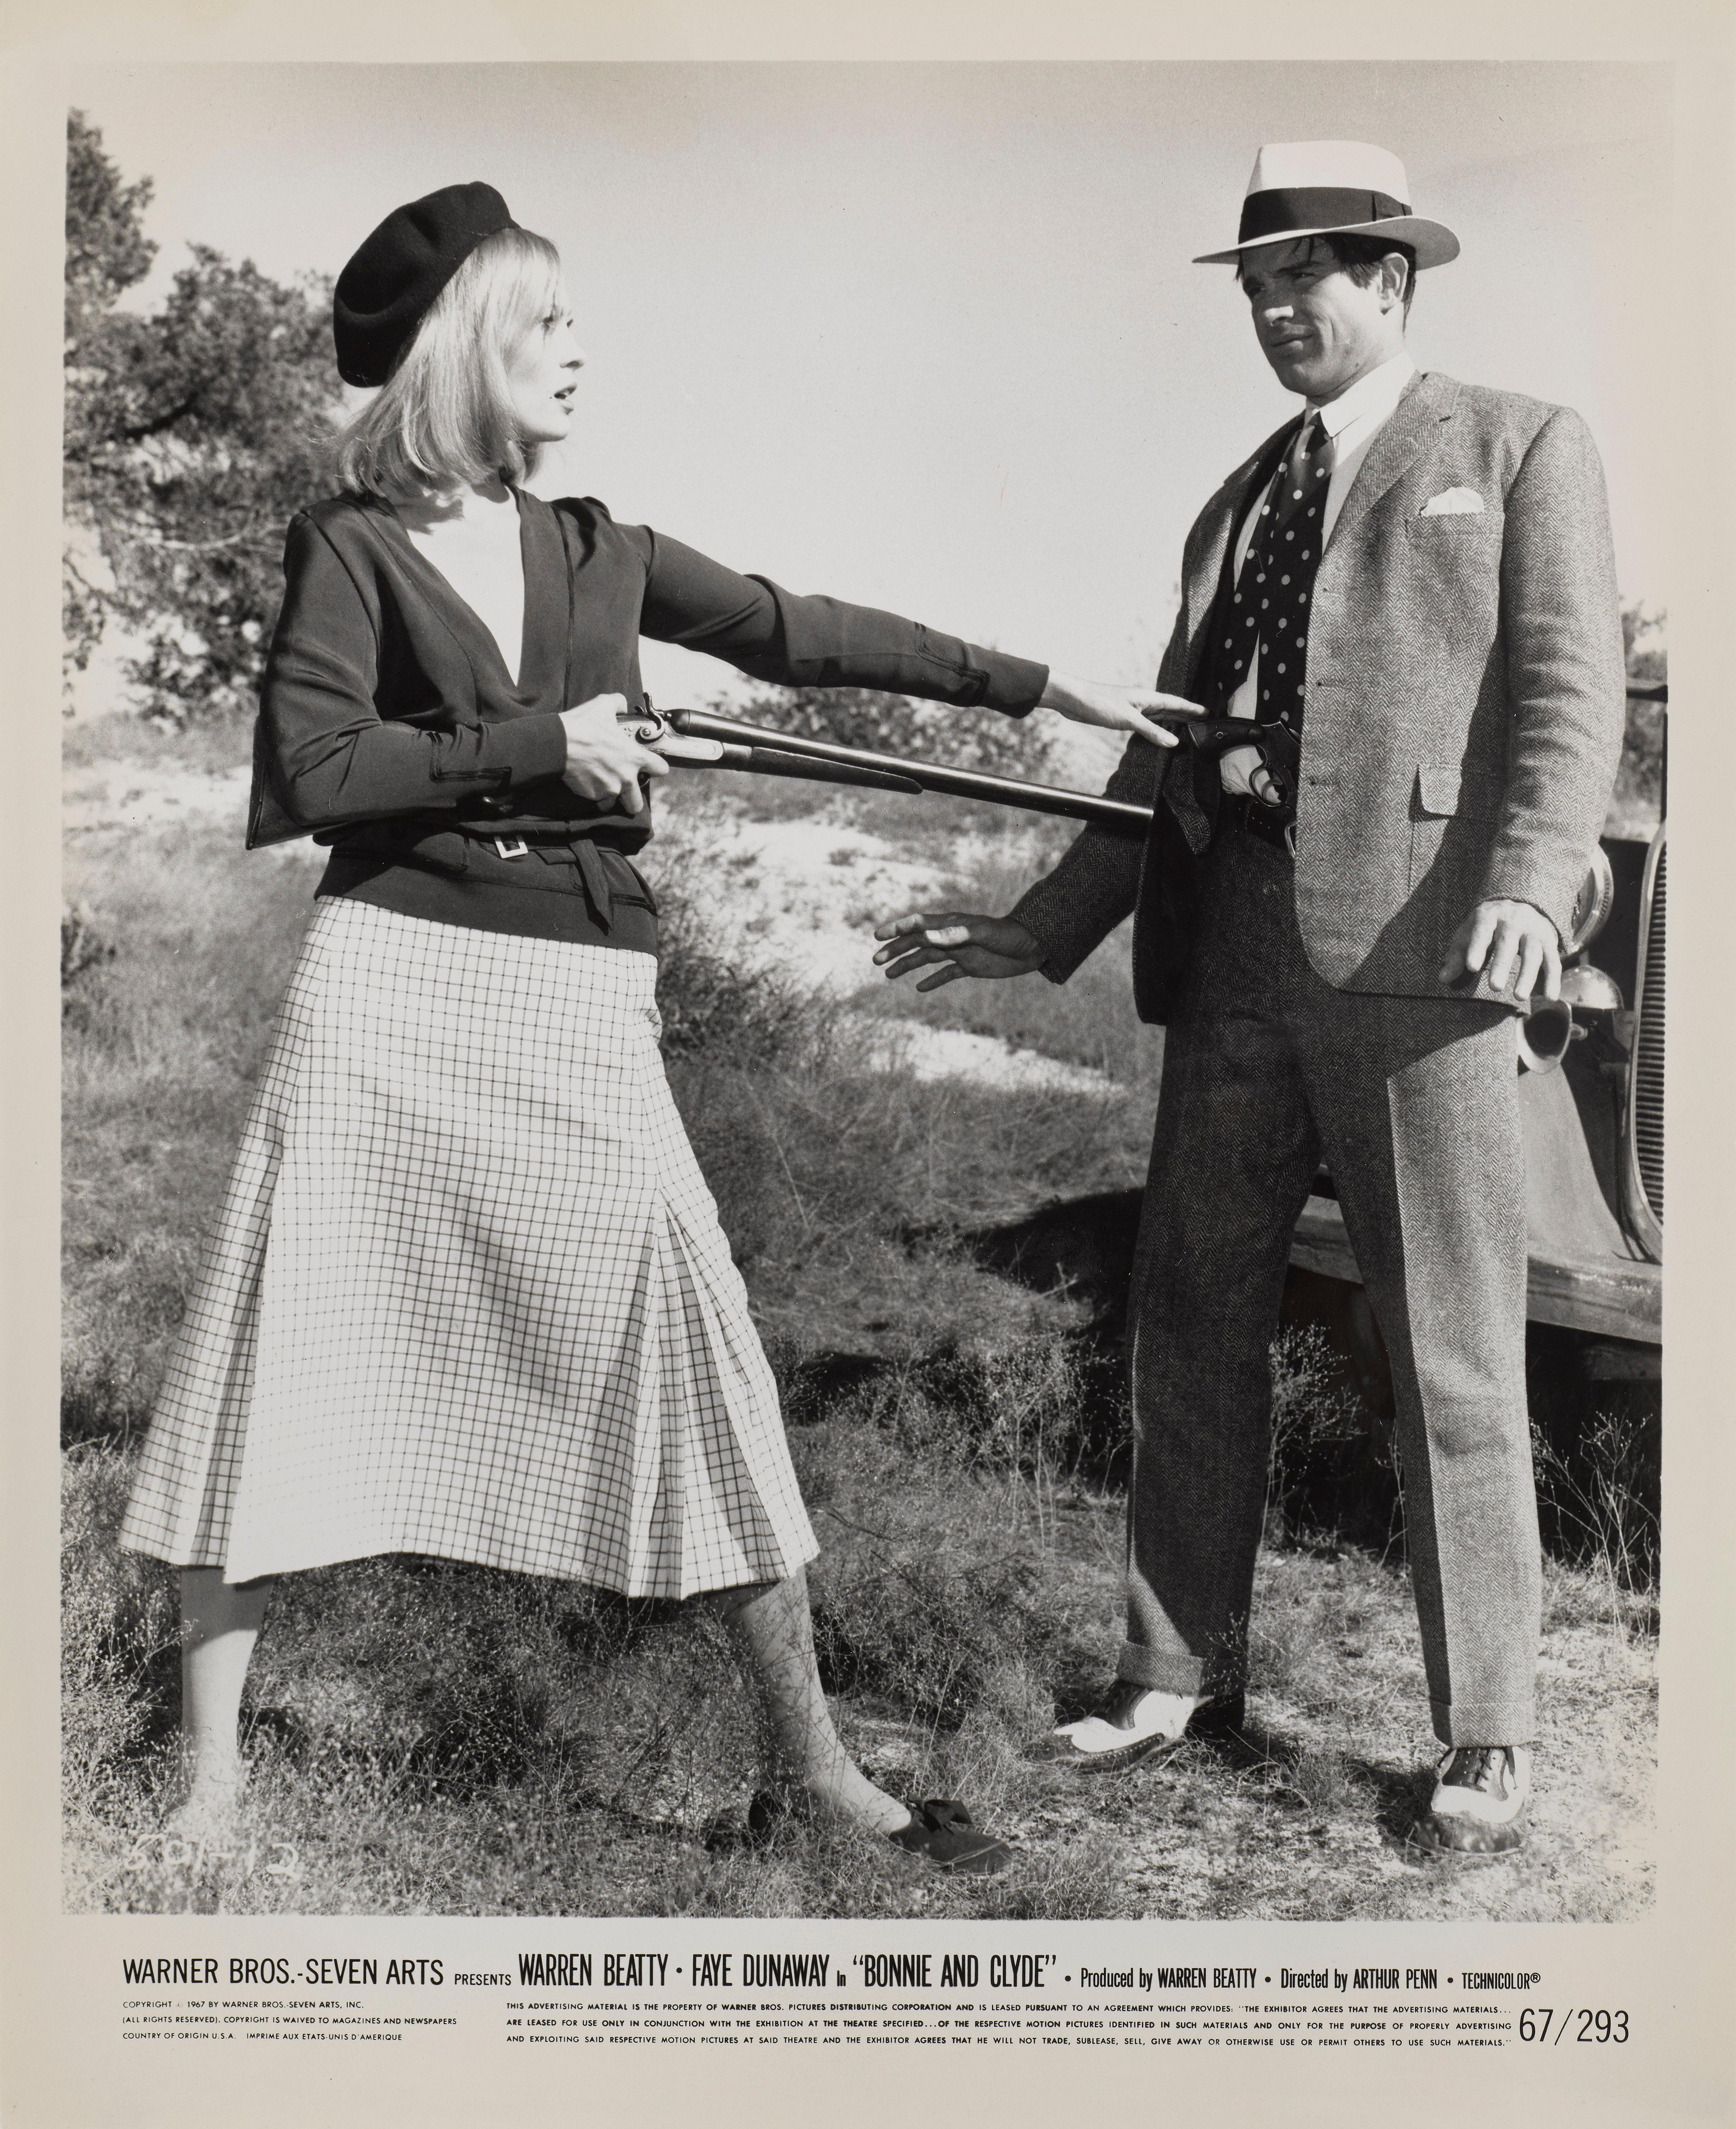 Original US photographic black and white production still from Warren Beatty and Faye Dunaway's 1967 crime romance directed by
Arthur Penn. This production still shows a great image of Faye Dunaway holding a shotgun at Warren Beatty.